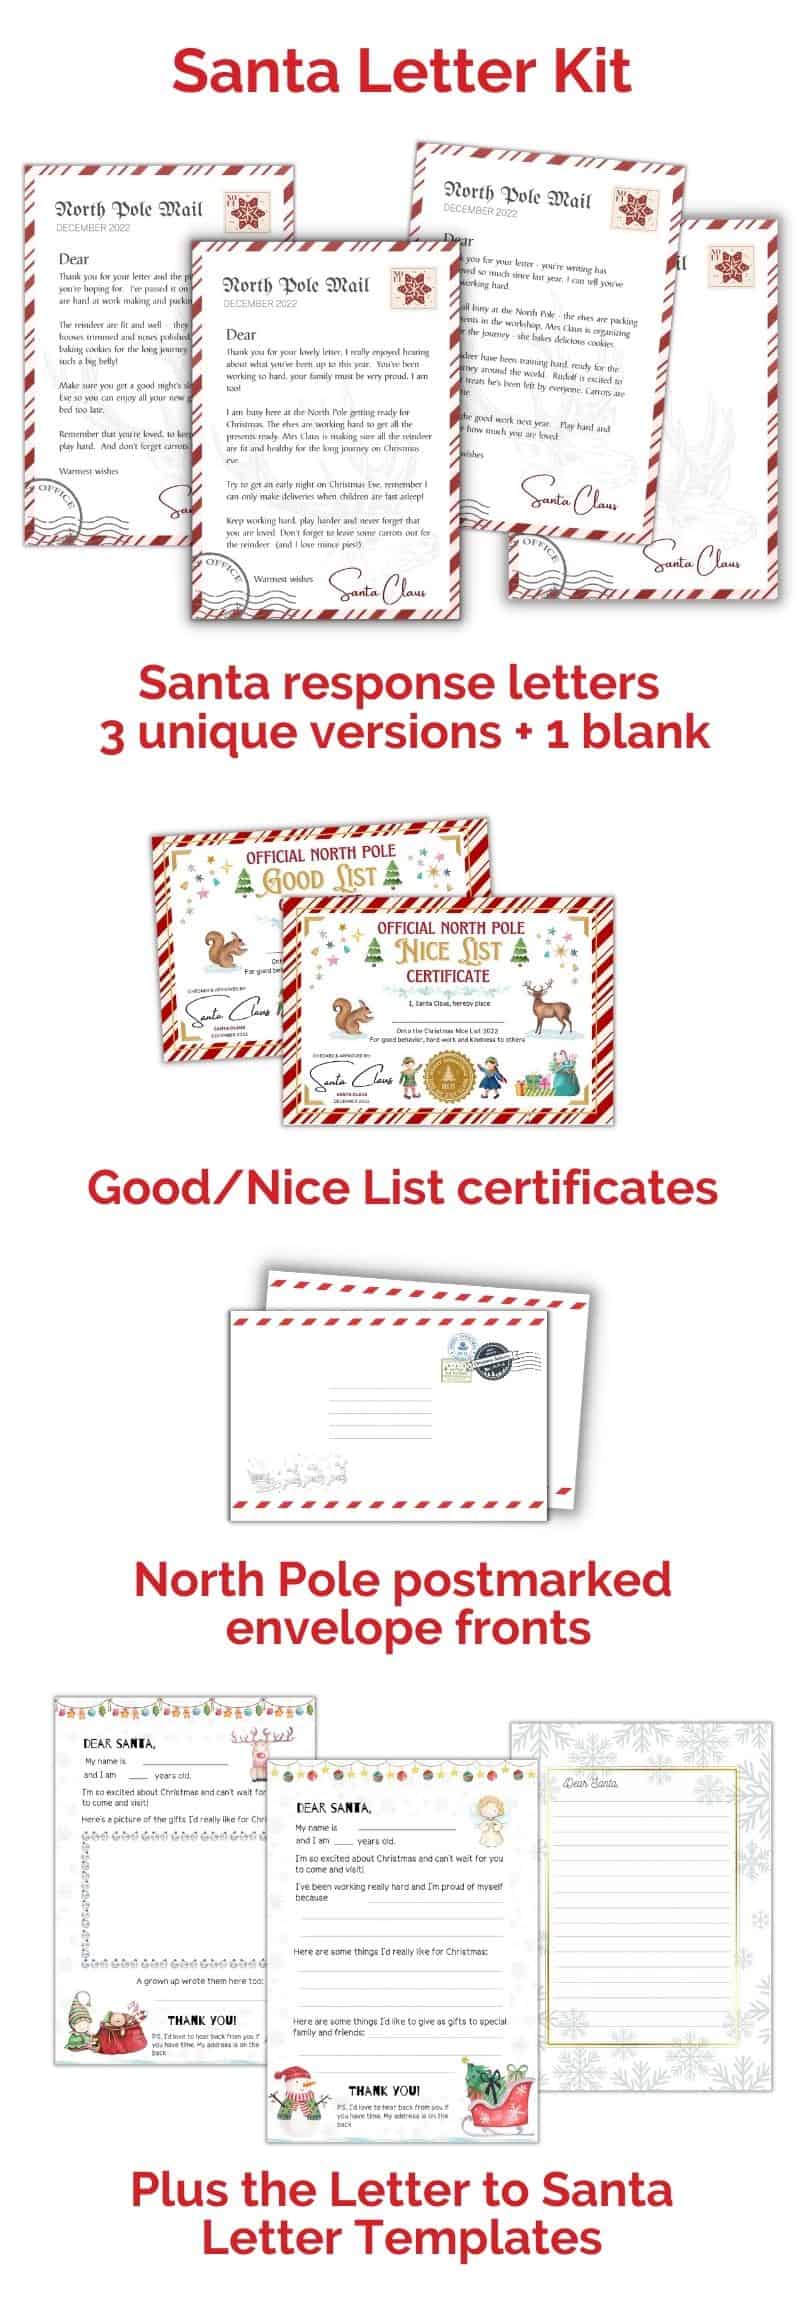 santa letter kit with letters to santa templates and mailing address details included